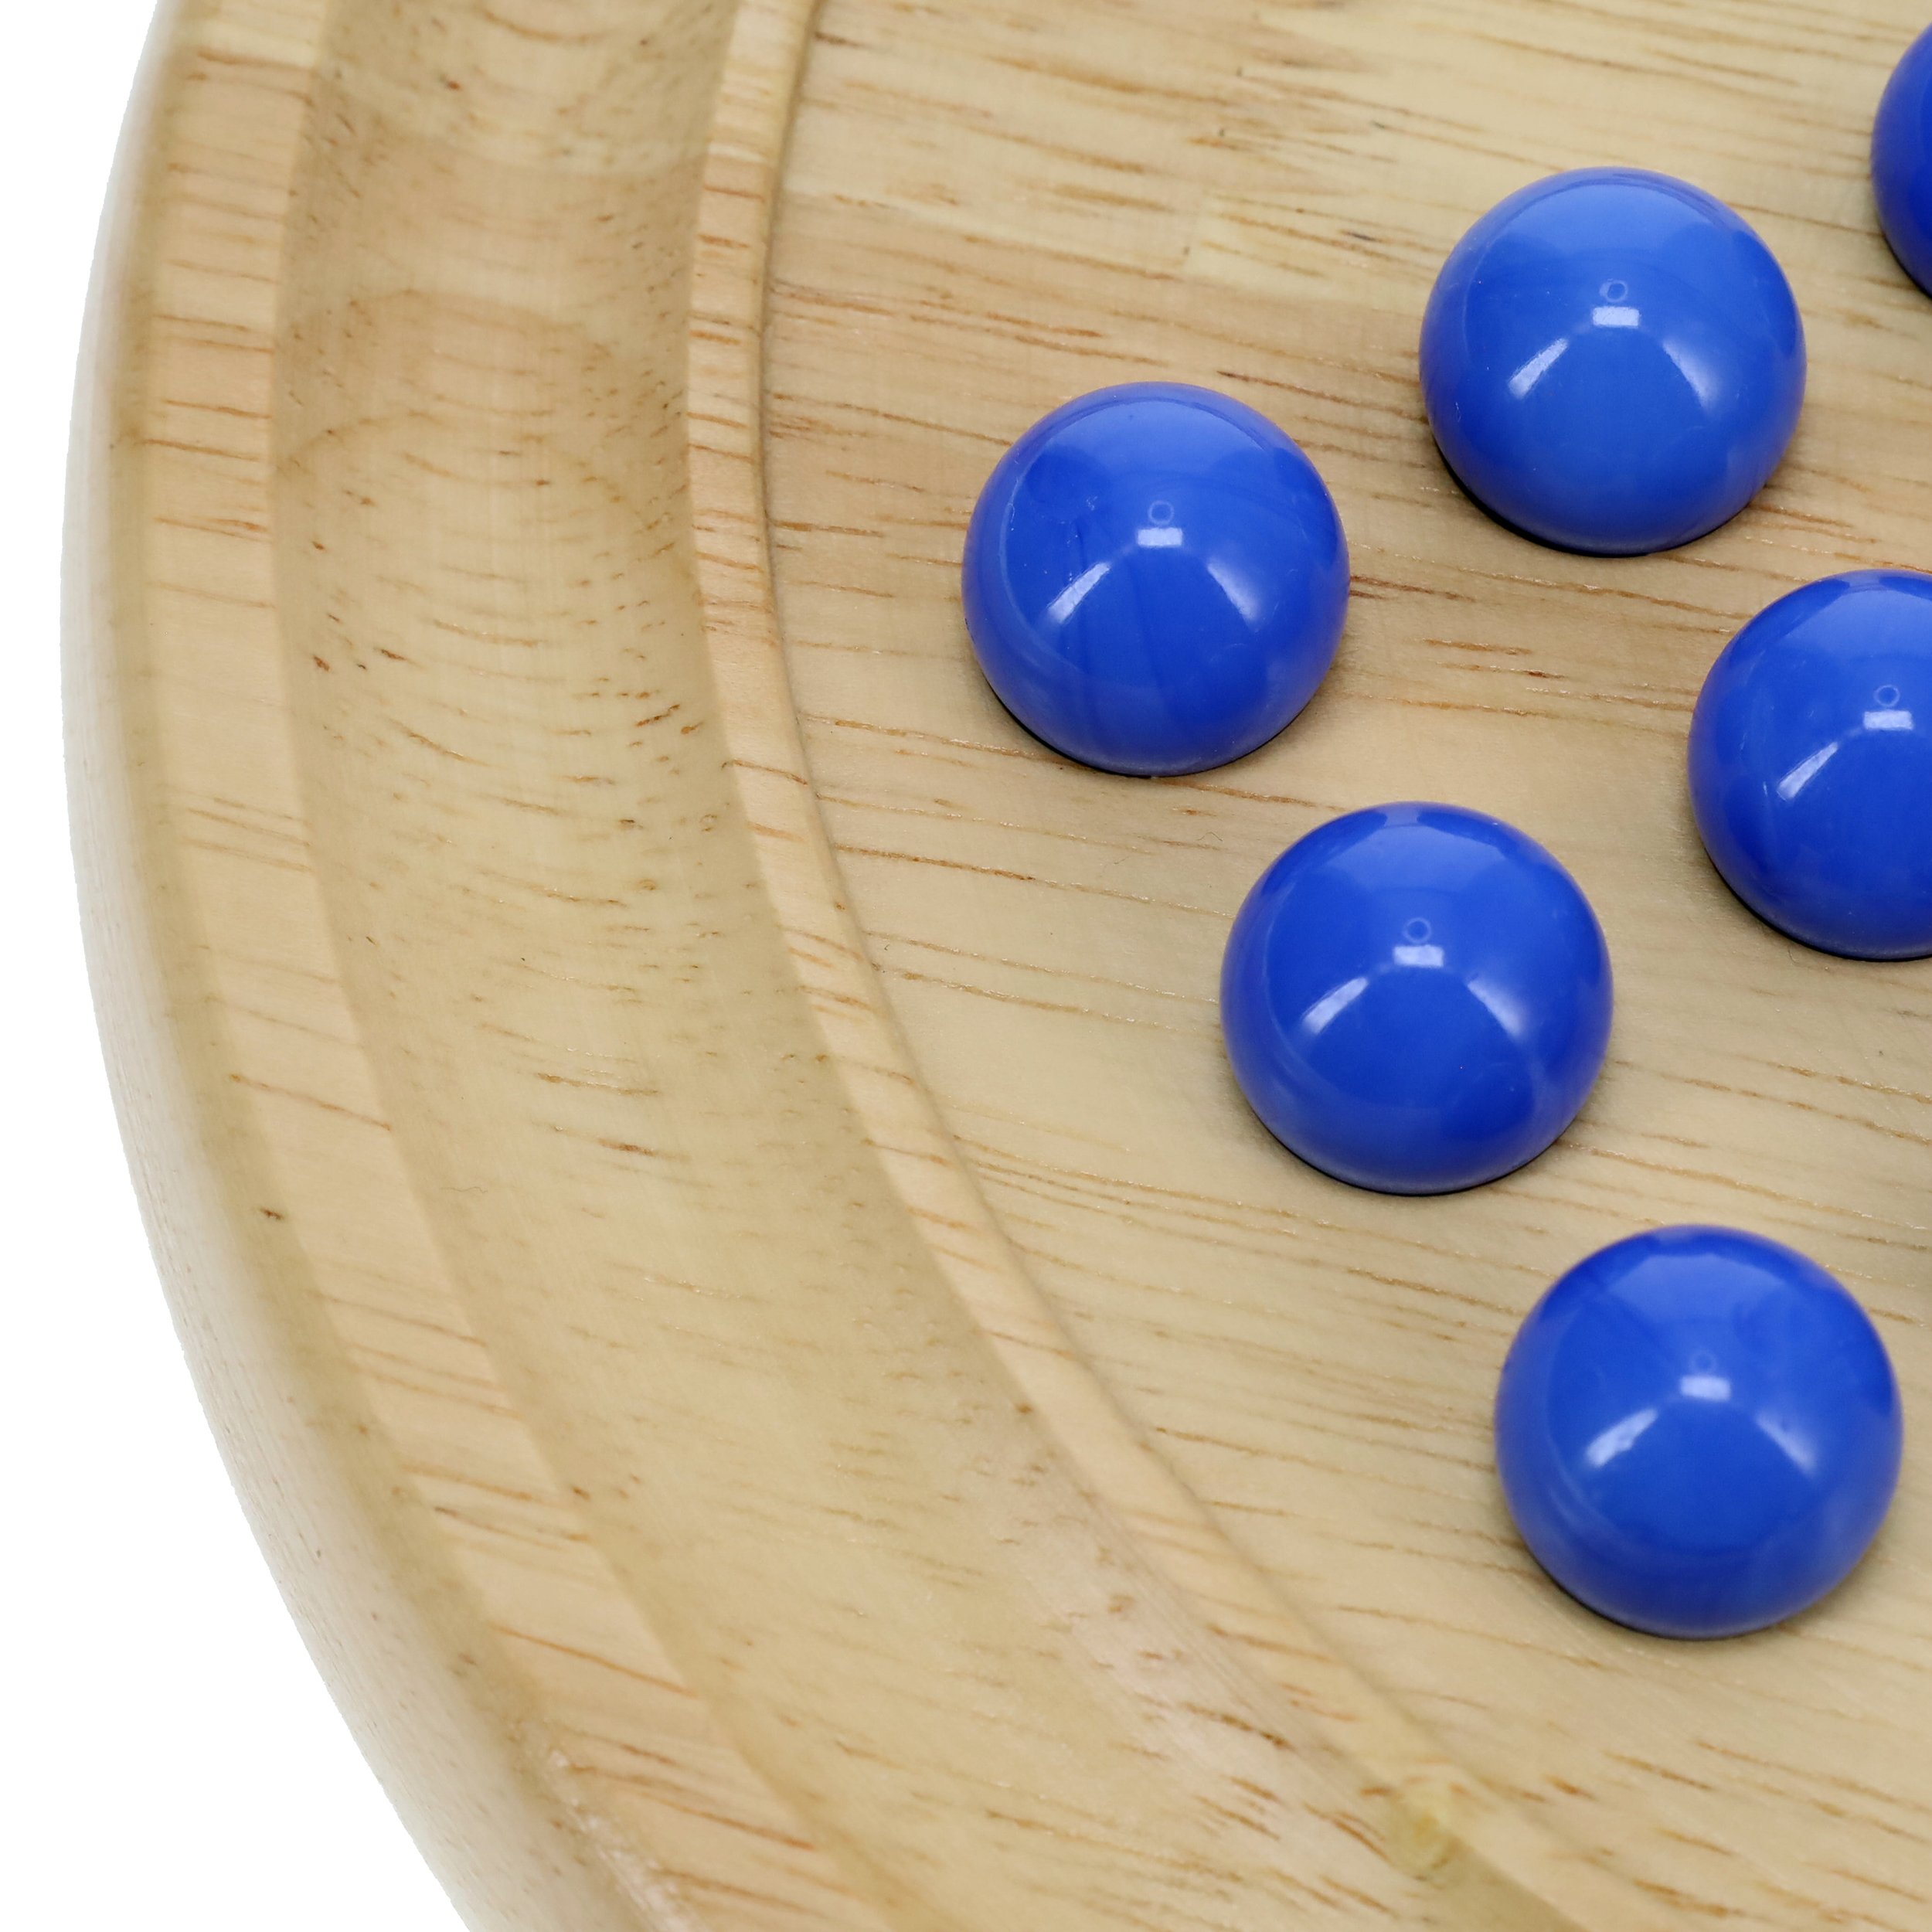 Solid Wood Solitaire with Blue Glass Marbles - 8.875 in. Diameter